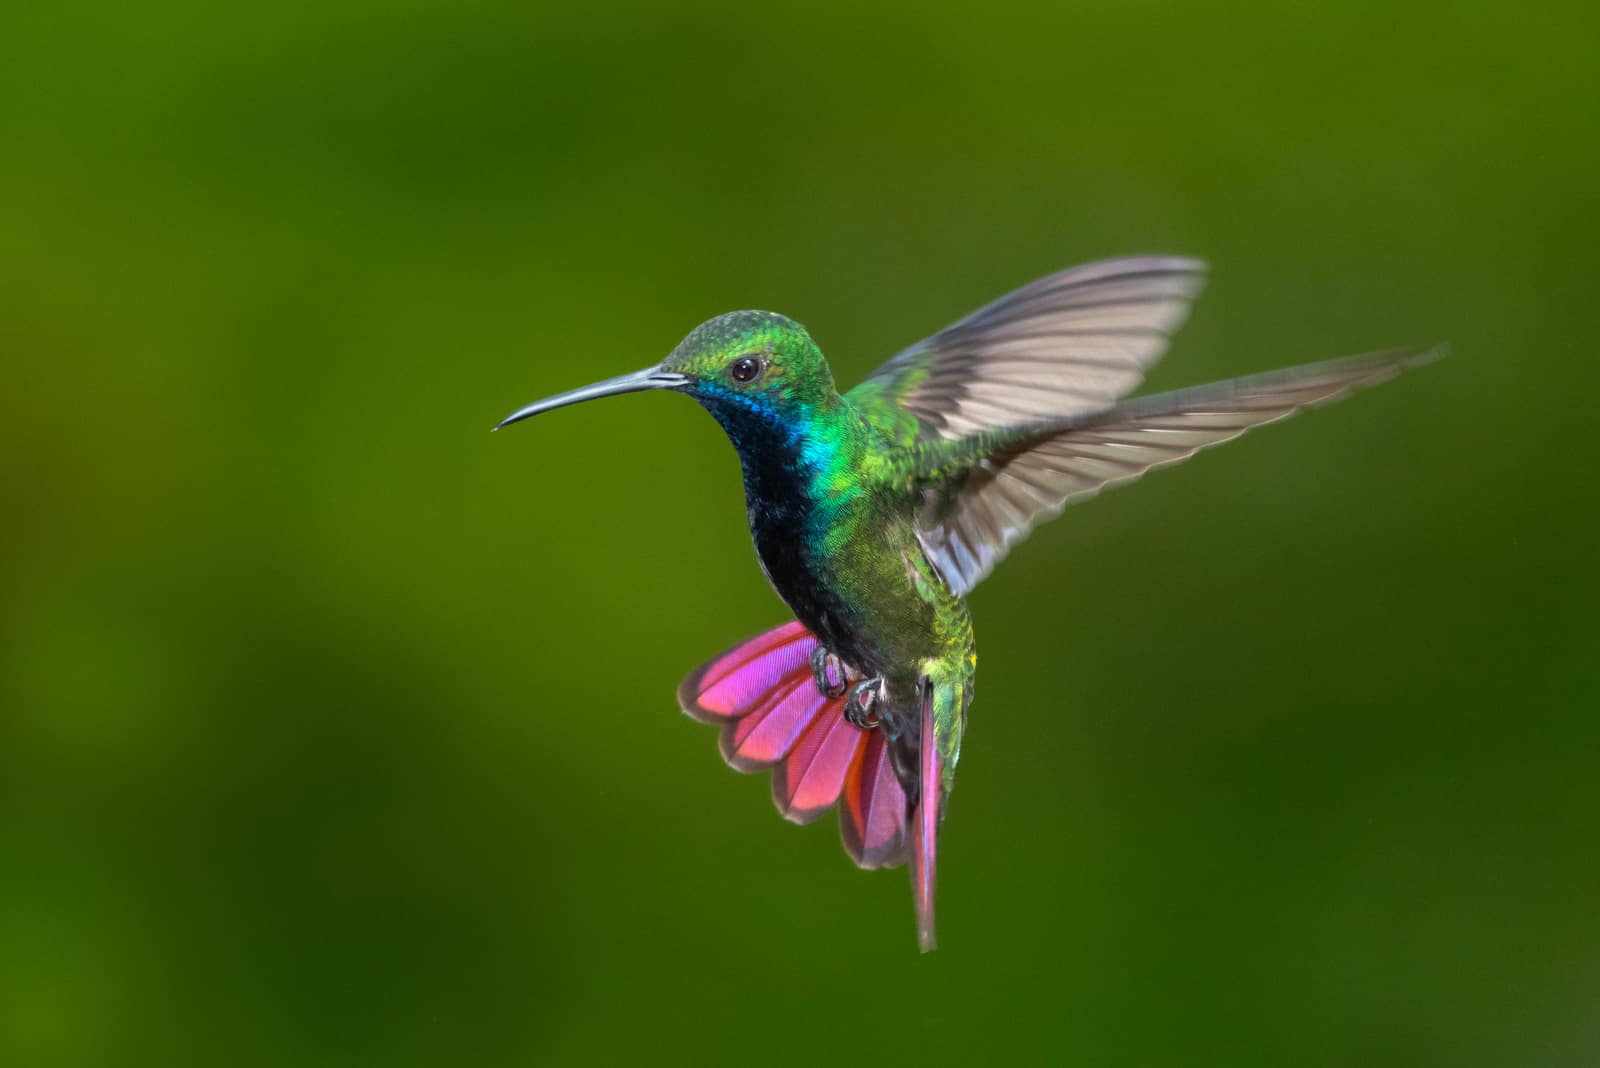 Black-throated Mango hummingbird hovering in the air